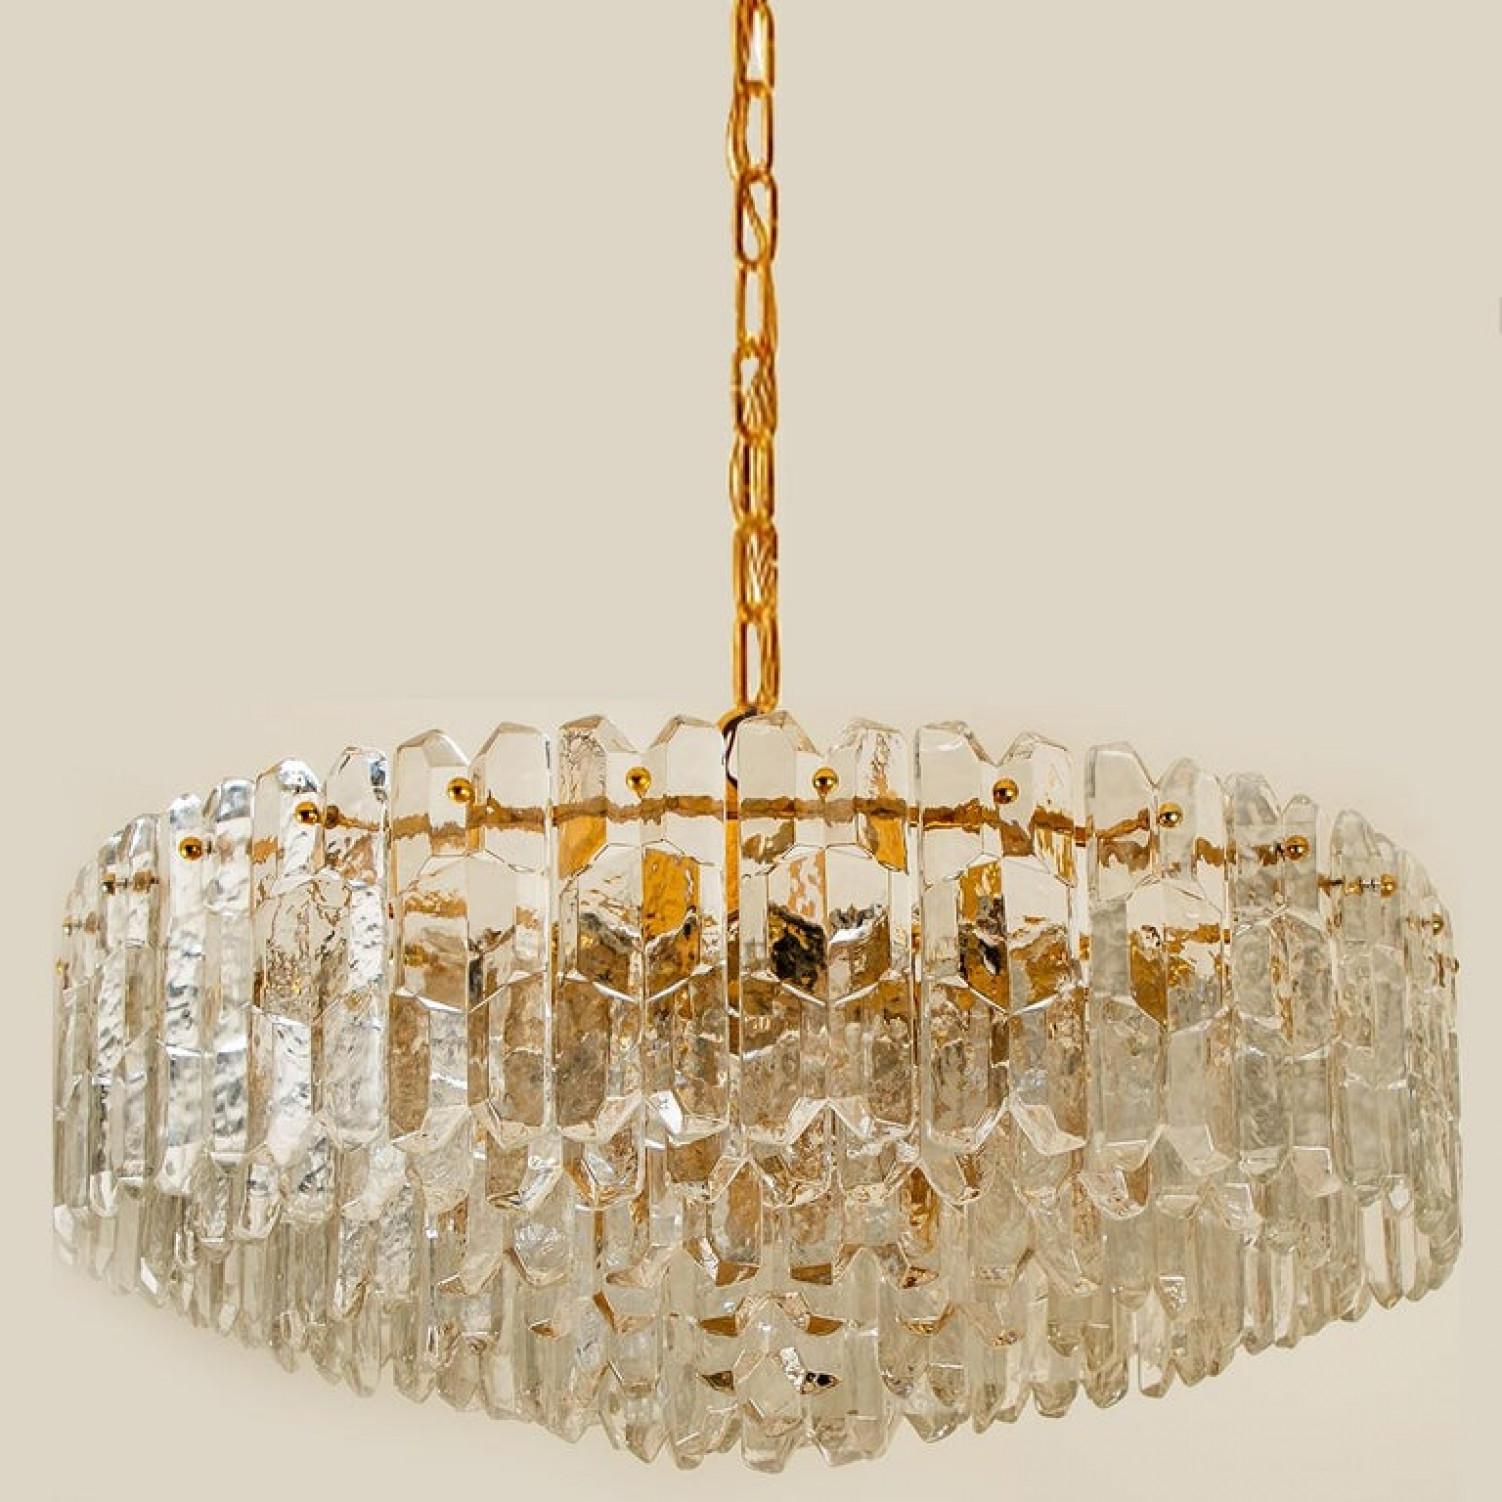 1 of the 2 Huge Kalmar Chandeliers 'Palazzo', Gilded Brass Glass, Austria, 1970s For Sale 4